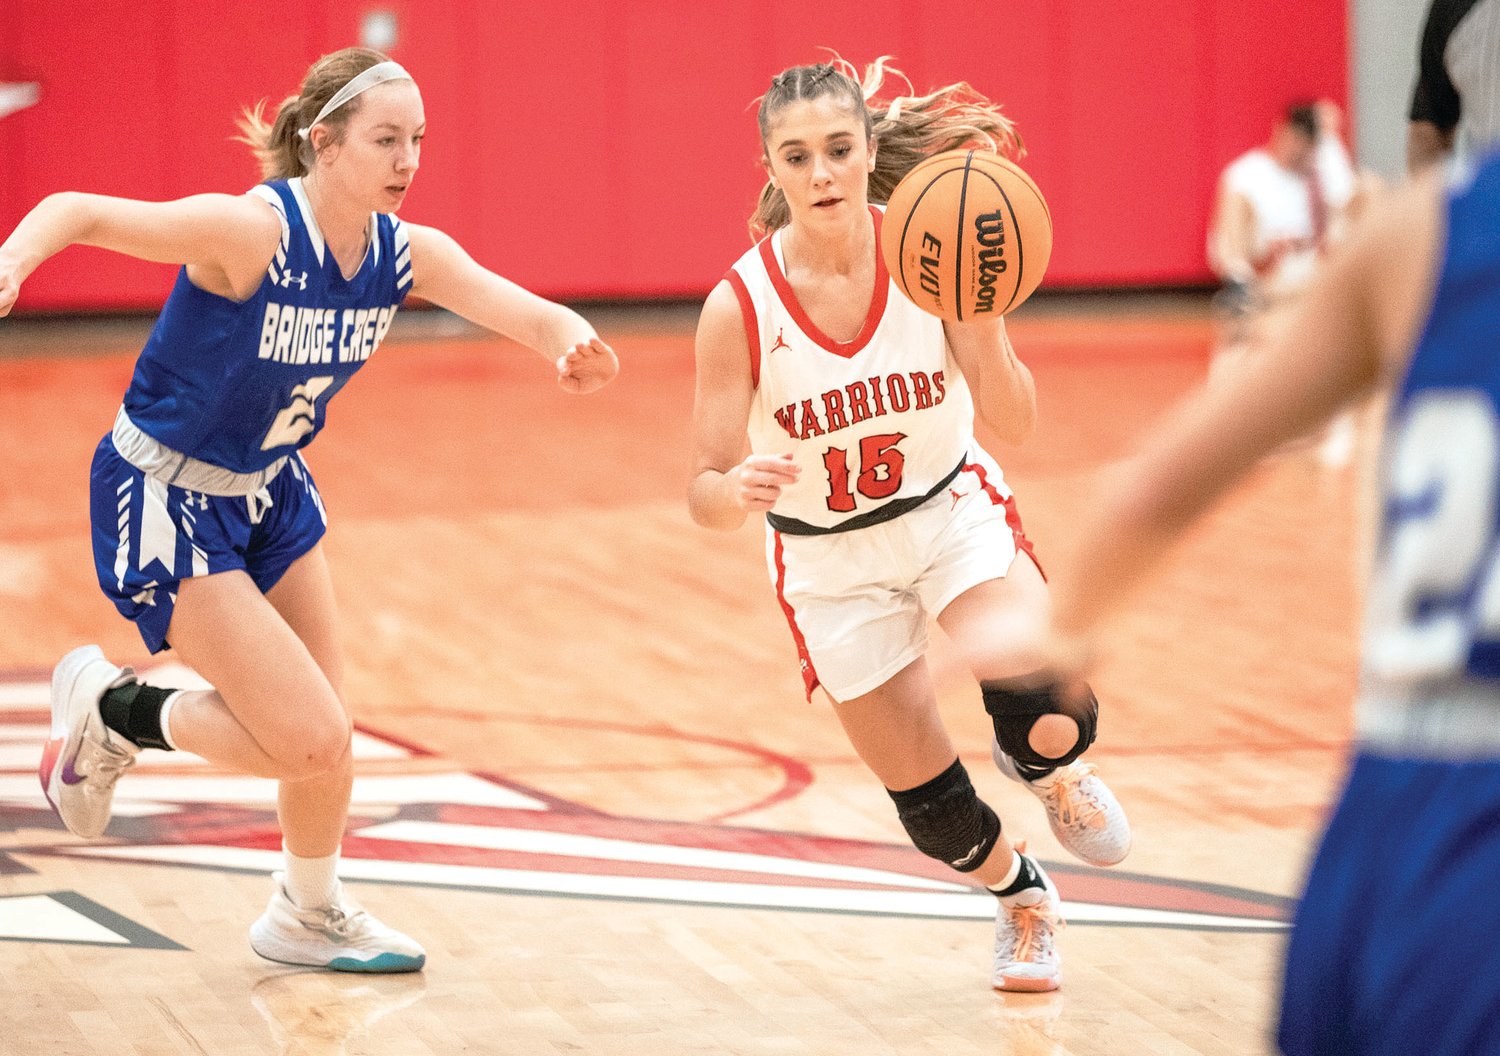 Washington senior Madisson Myers dribbles to the lane. Myers and the Warriors play in the Bobby Hicks
Invitational Basketball Tournament in Little Axe this week. They play Chickasha today (Thursday) at 6 p.m.